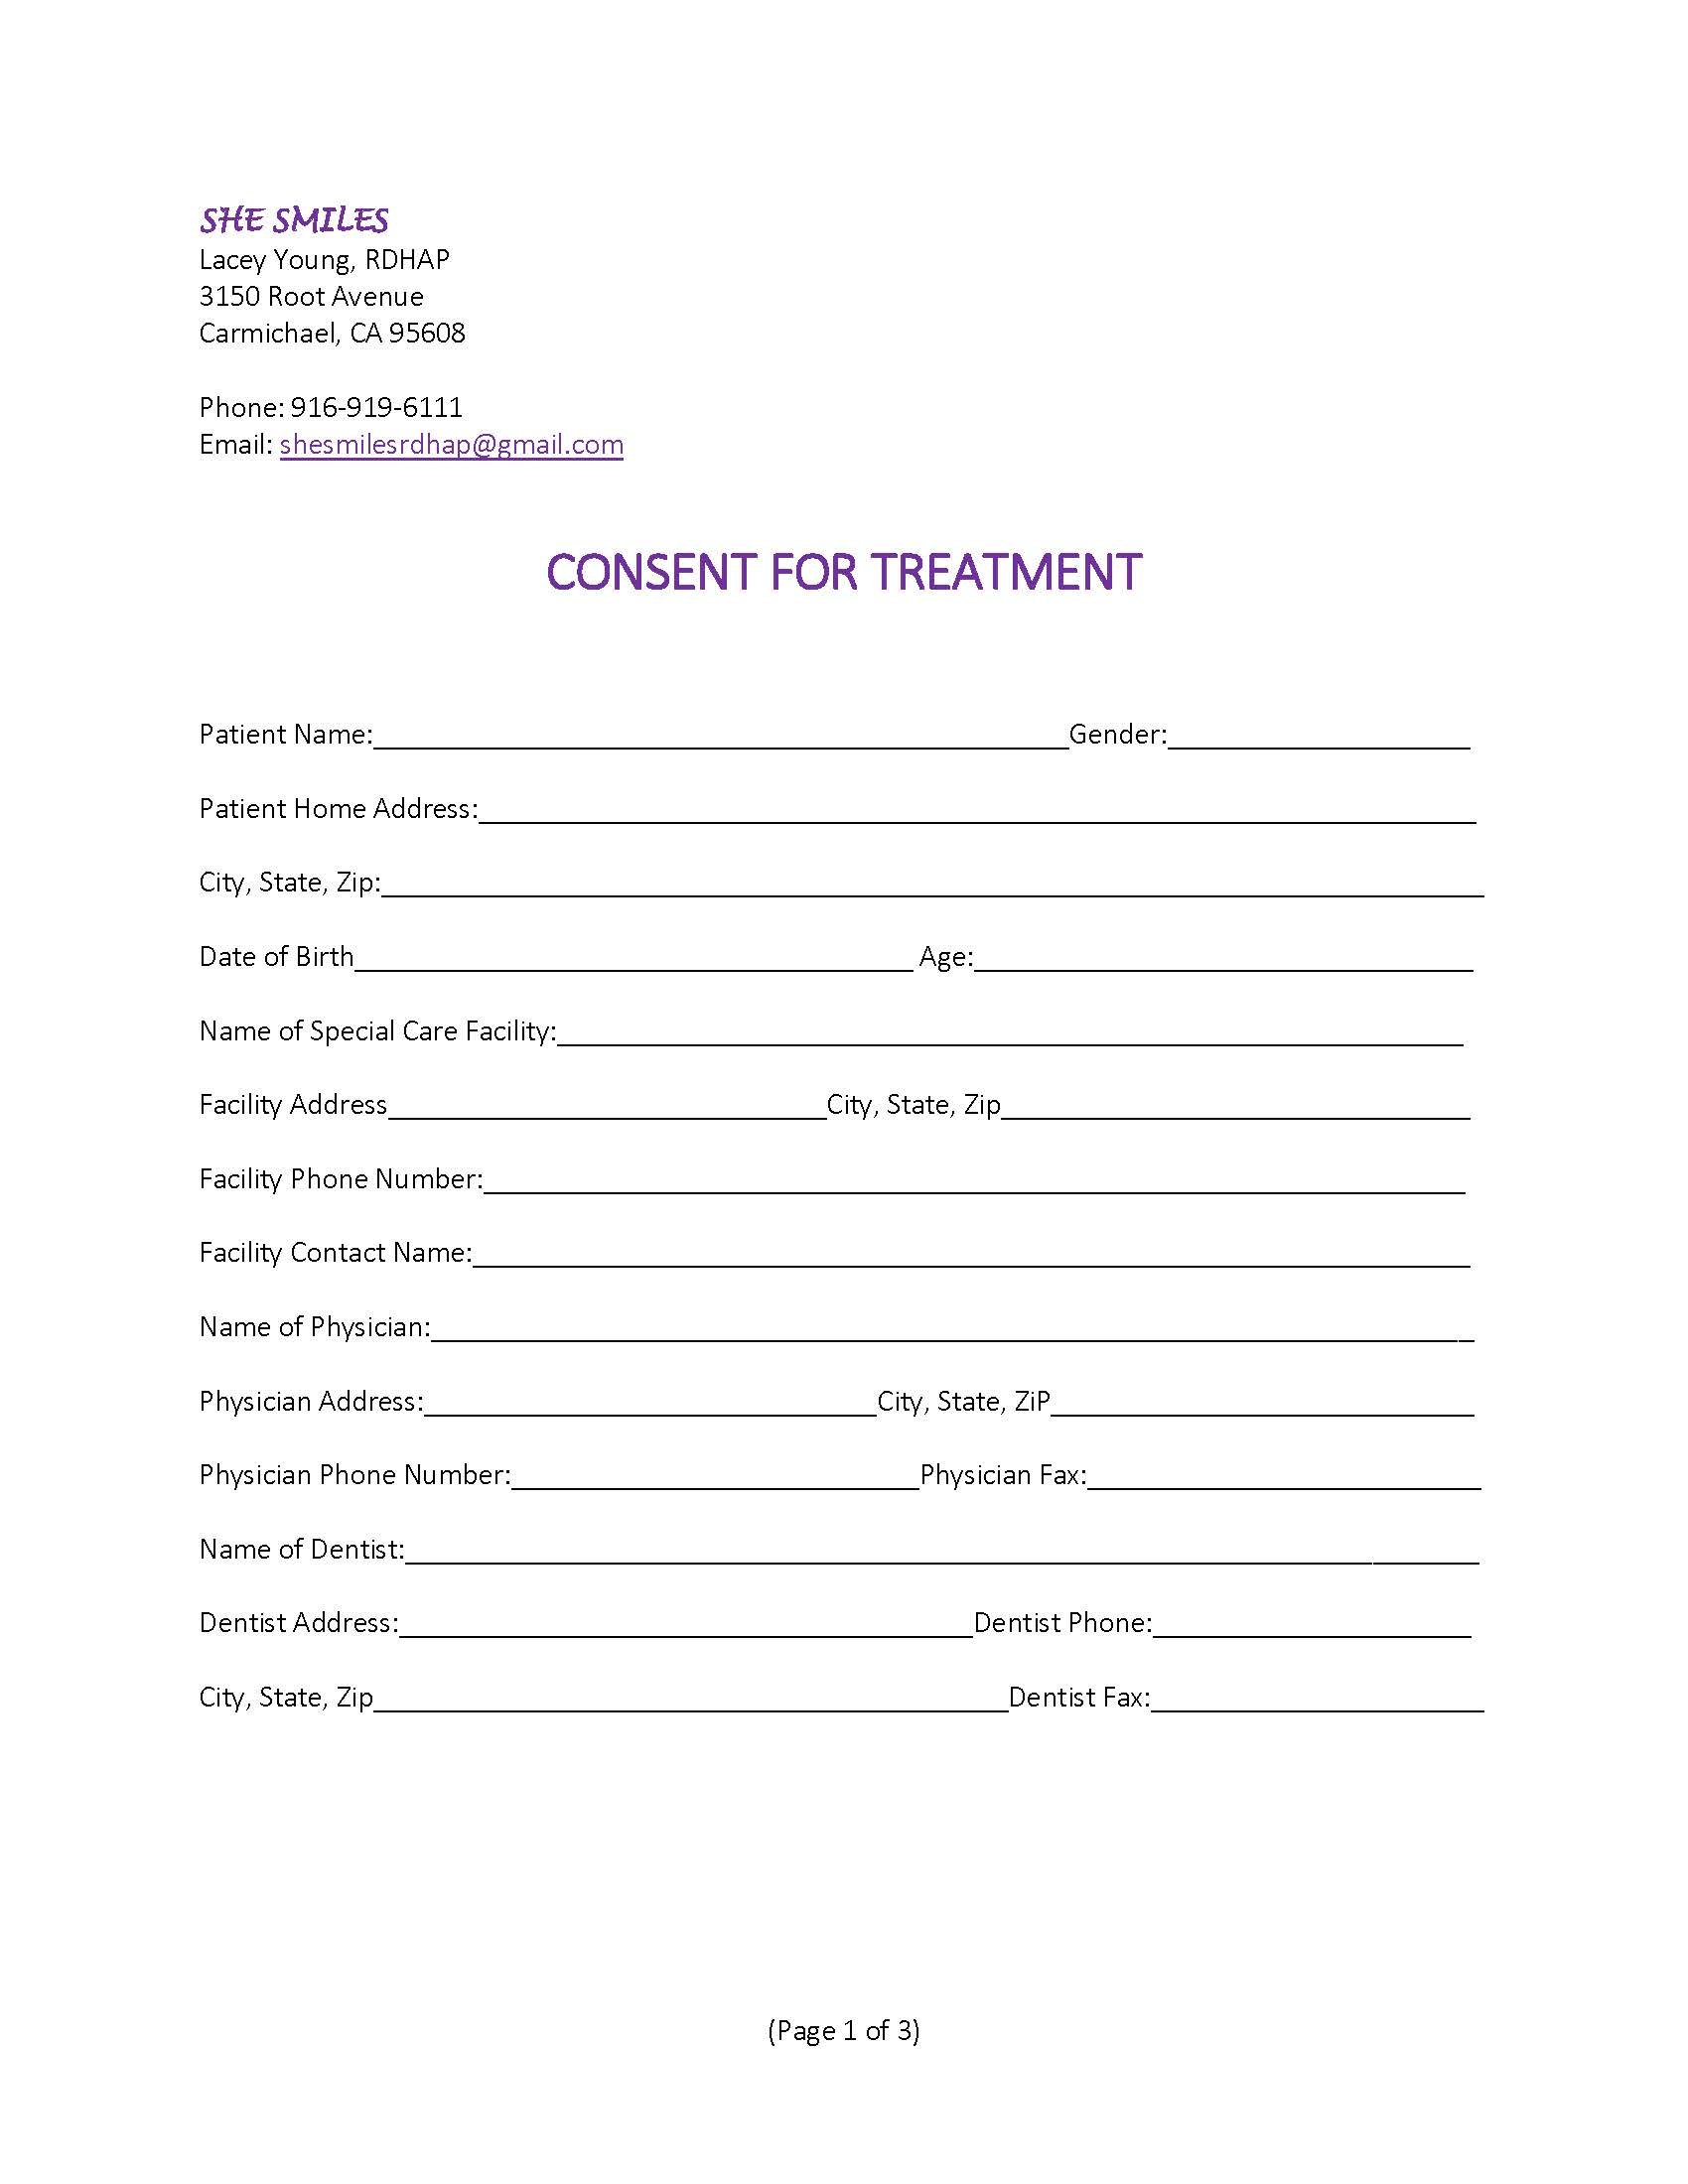 Consent forms Page 1 1